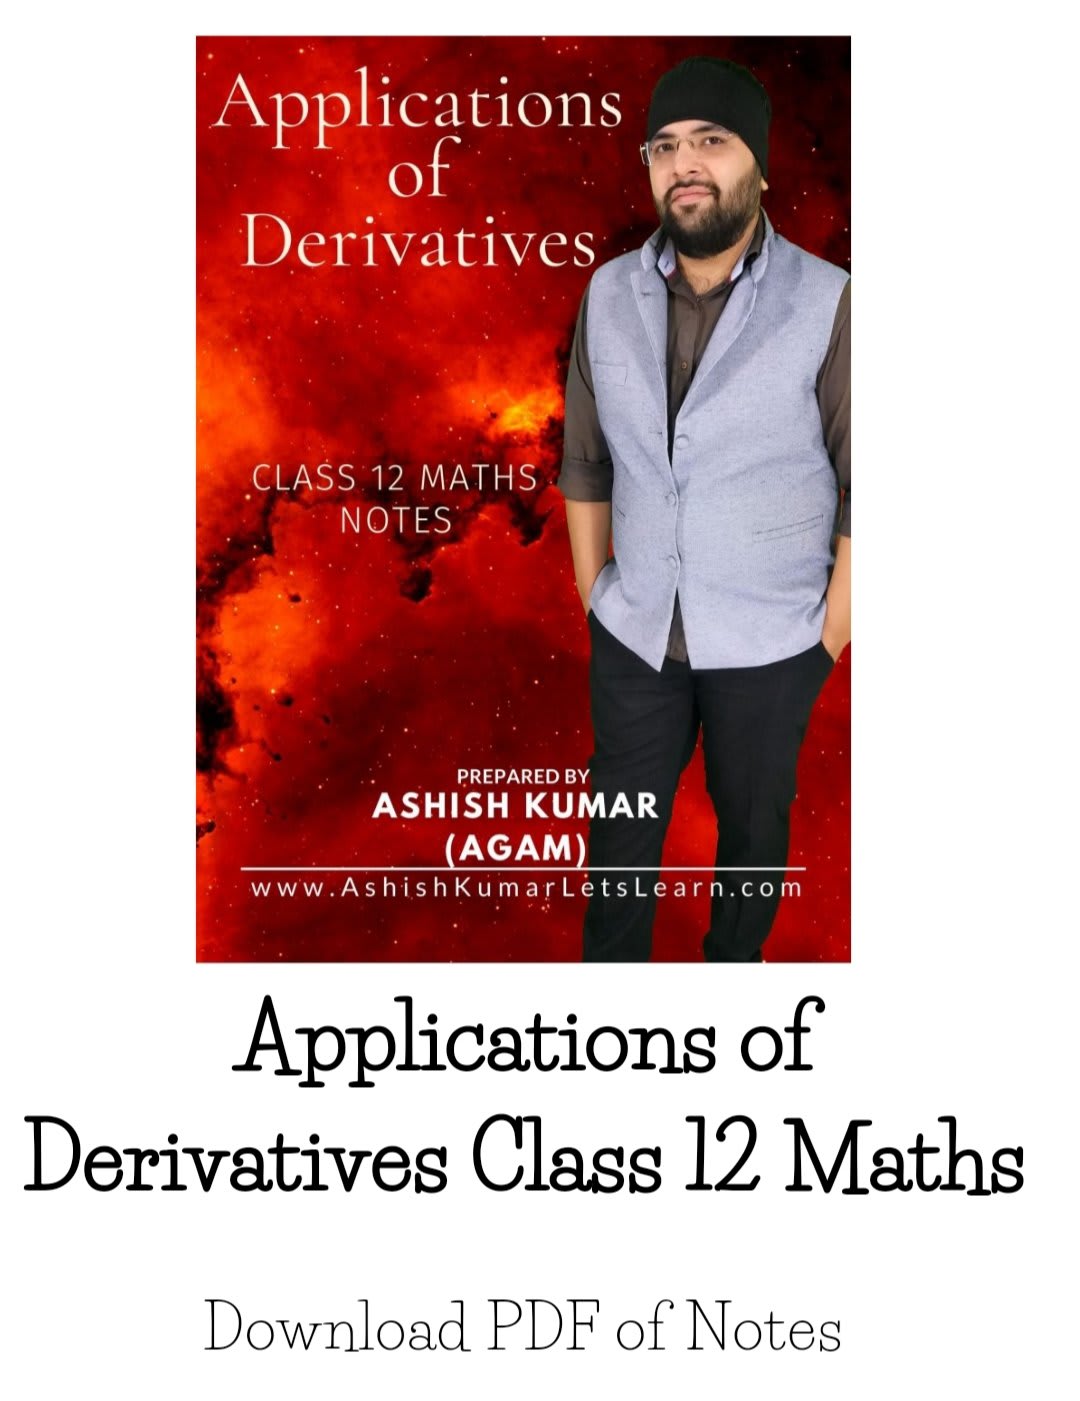 PDF Notes of Applications of Derivatives Class 12 Maths - SC Classifieds